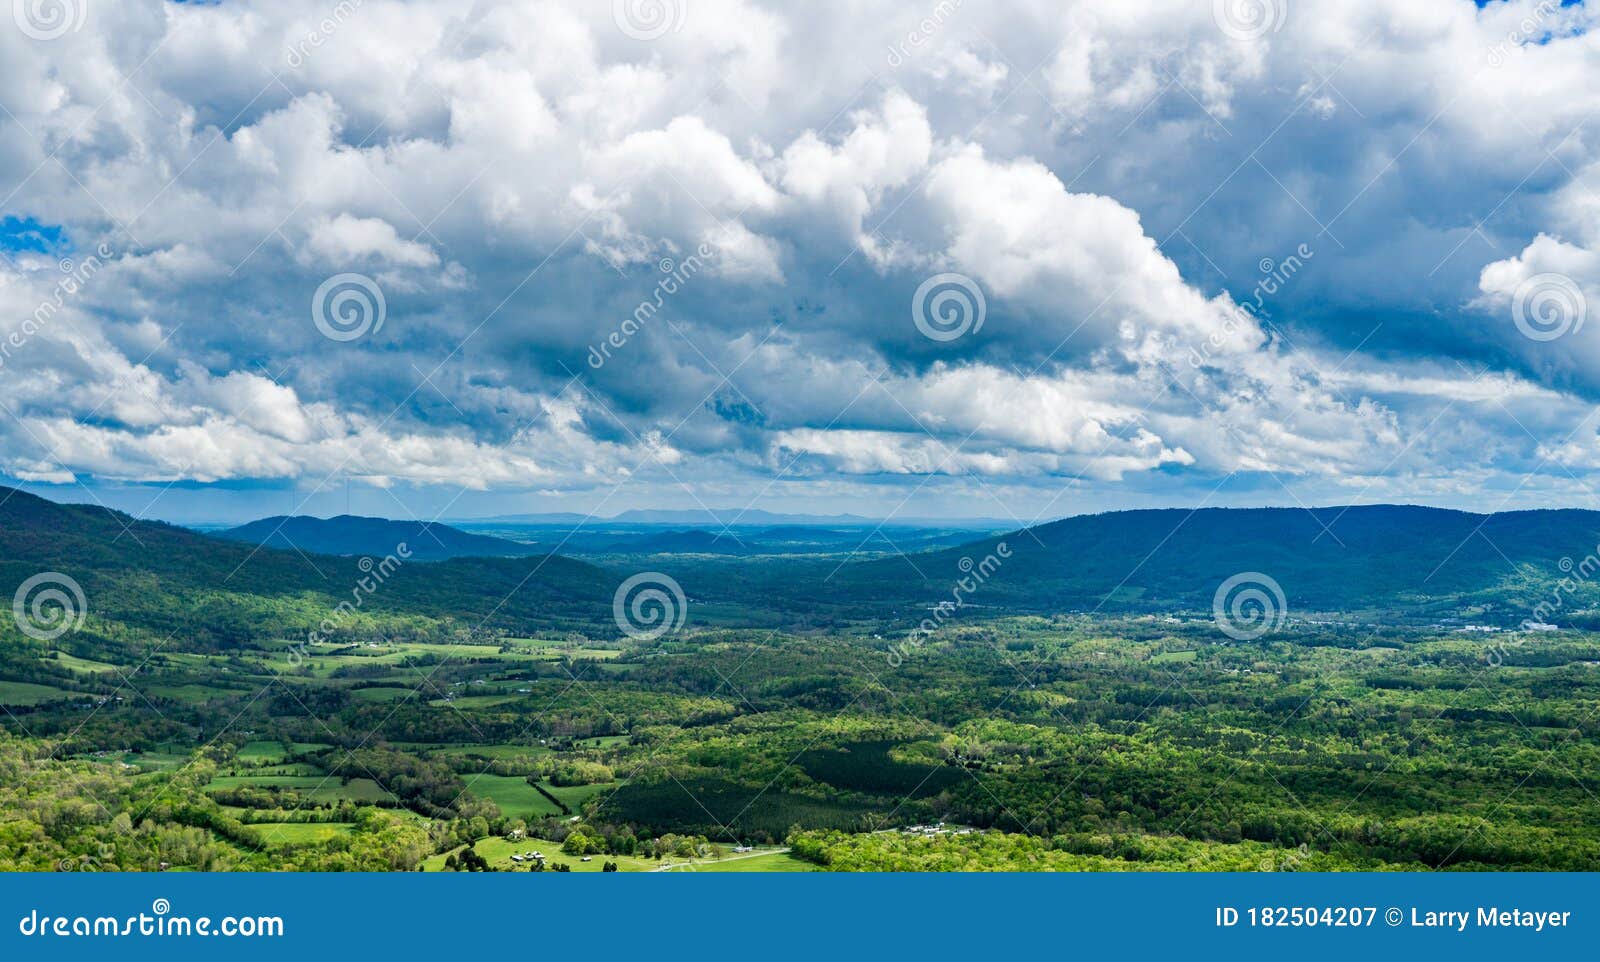 stratocumulus storm clouds over the valley